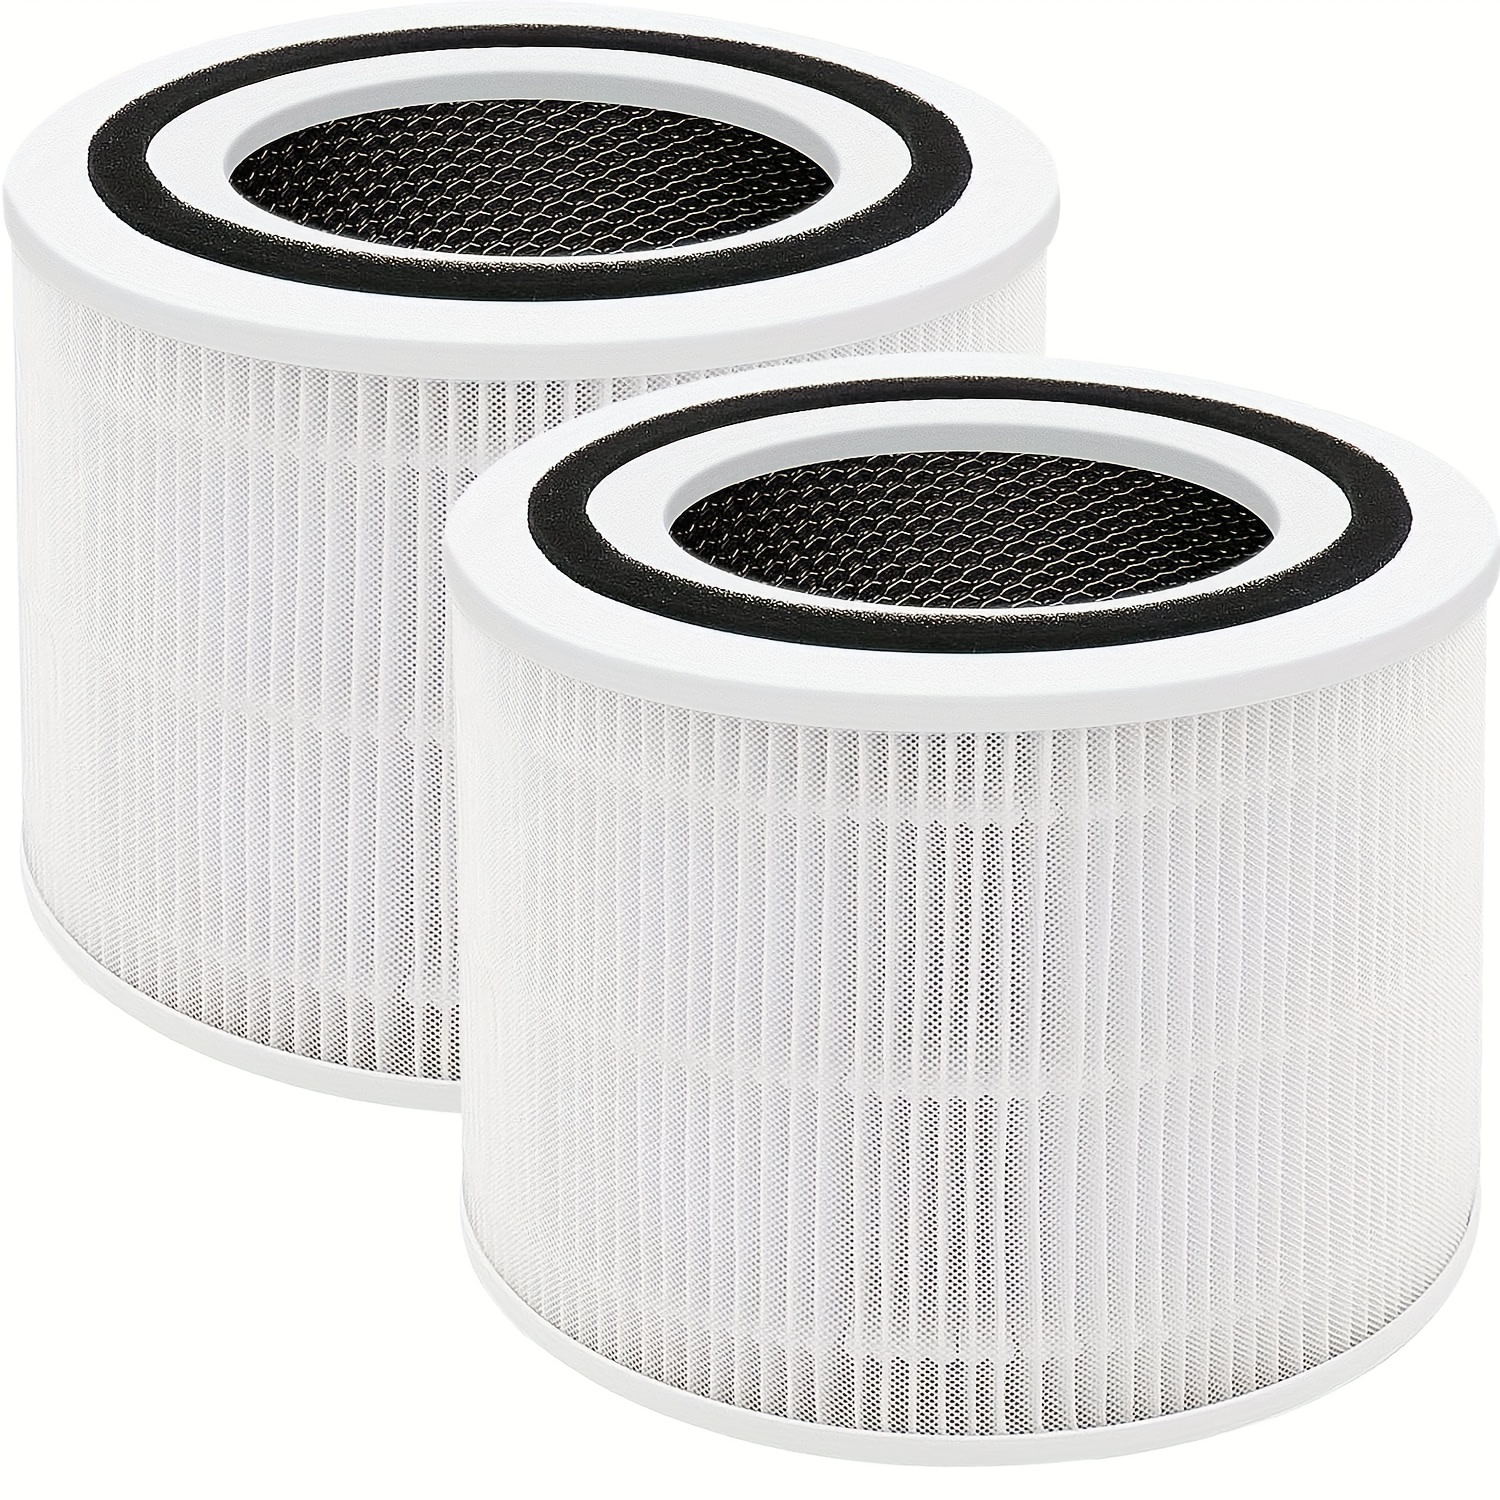  for LEVOIT LV-PUR131 Air Purifier Replacement Filter 2 HEPA  Filters & 2 True HEPA H13 Activated Carbon Filters Set Pre Compatible with  3Stage Filtration Durabasics LV-PUR131S and LV-PUR131-RF, 2 Pack 